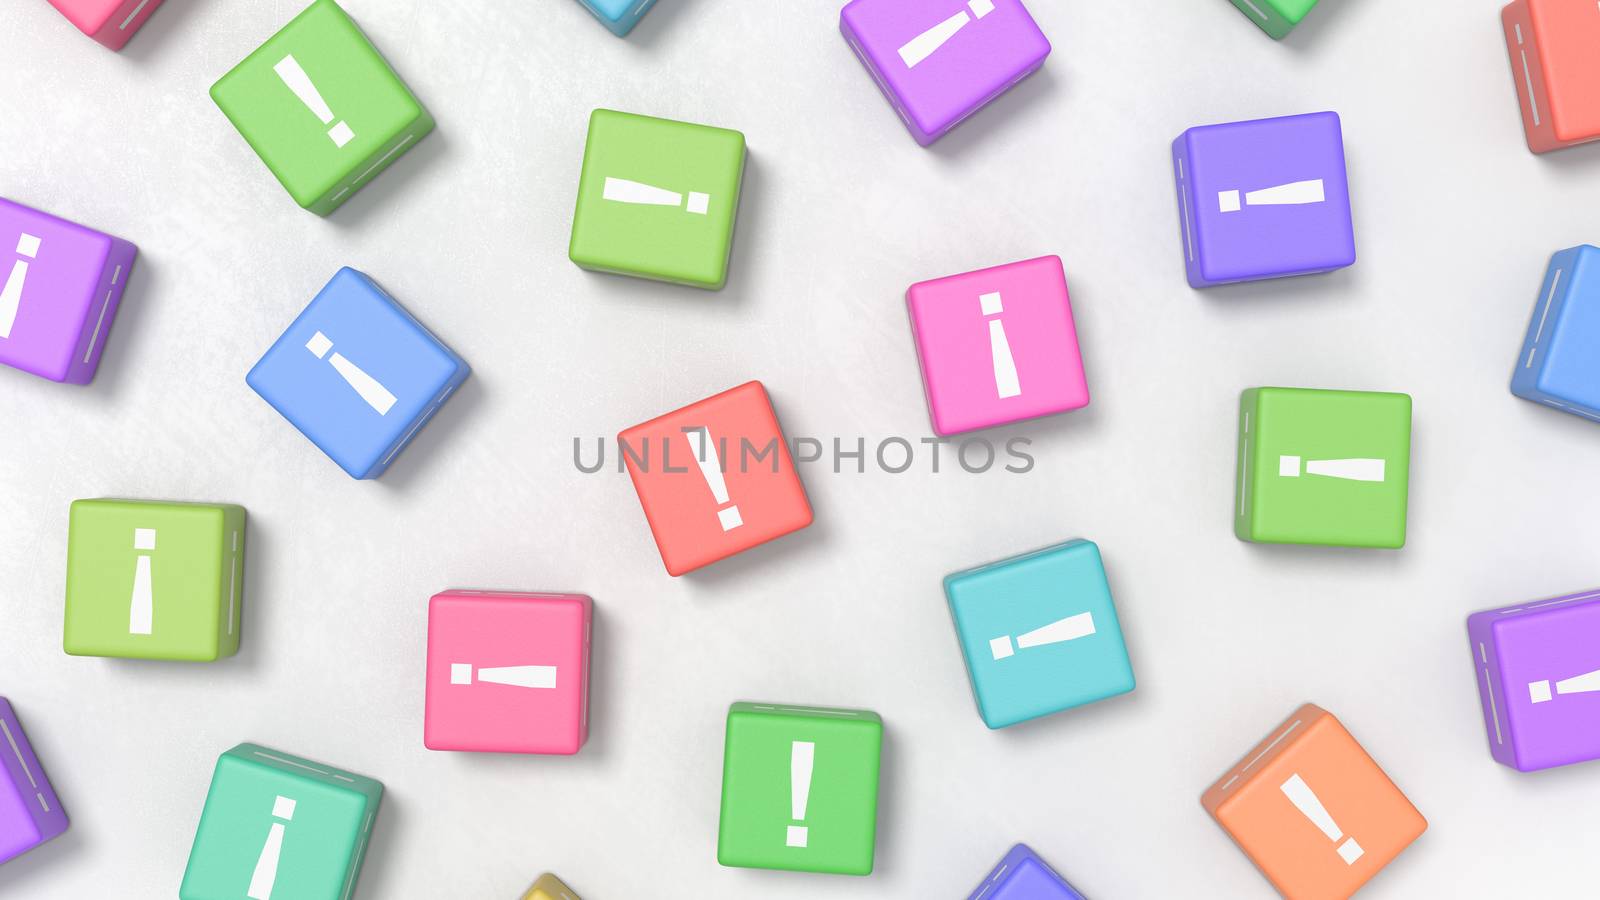 Many Exclamation Point on Colofrul Cubes on a Light Gray Plastered Background 3D Illustration